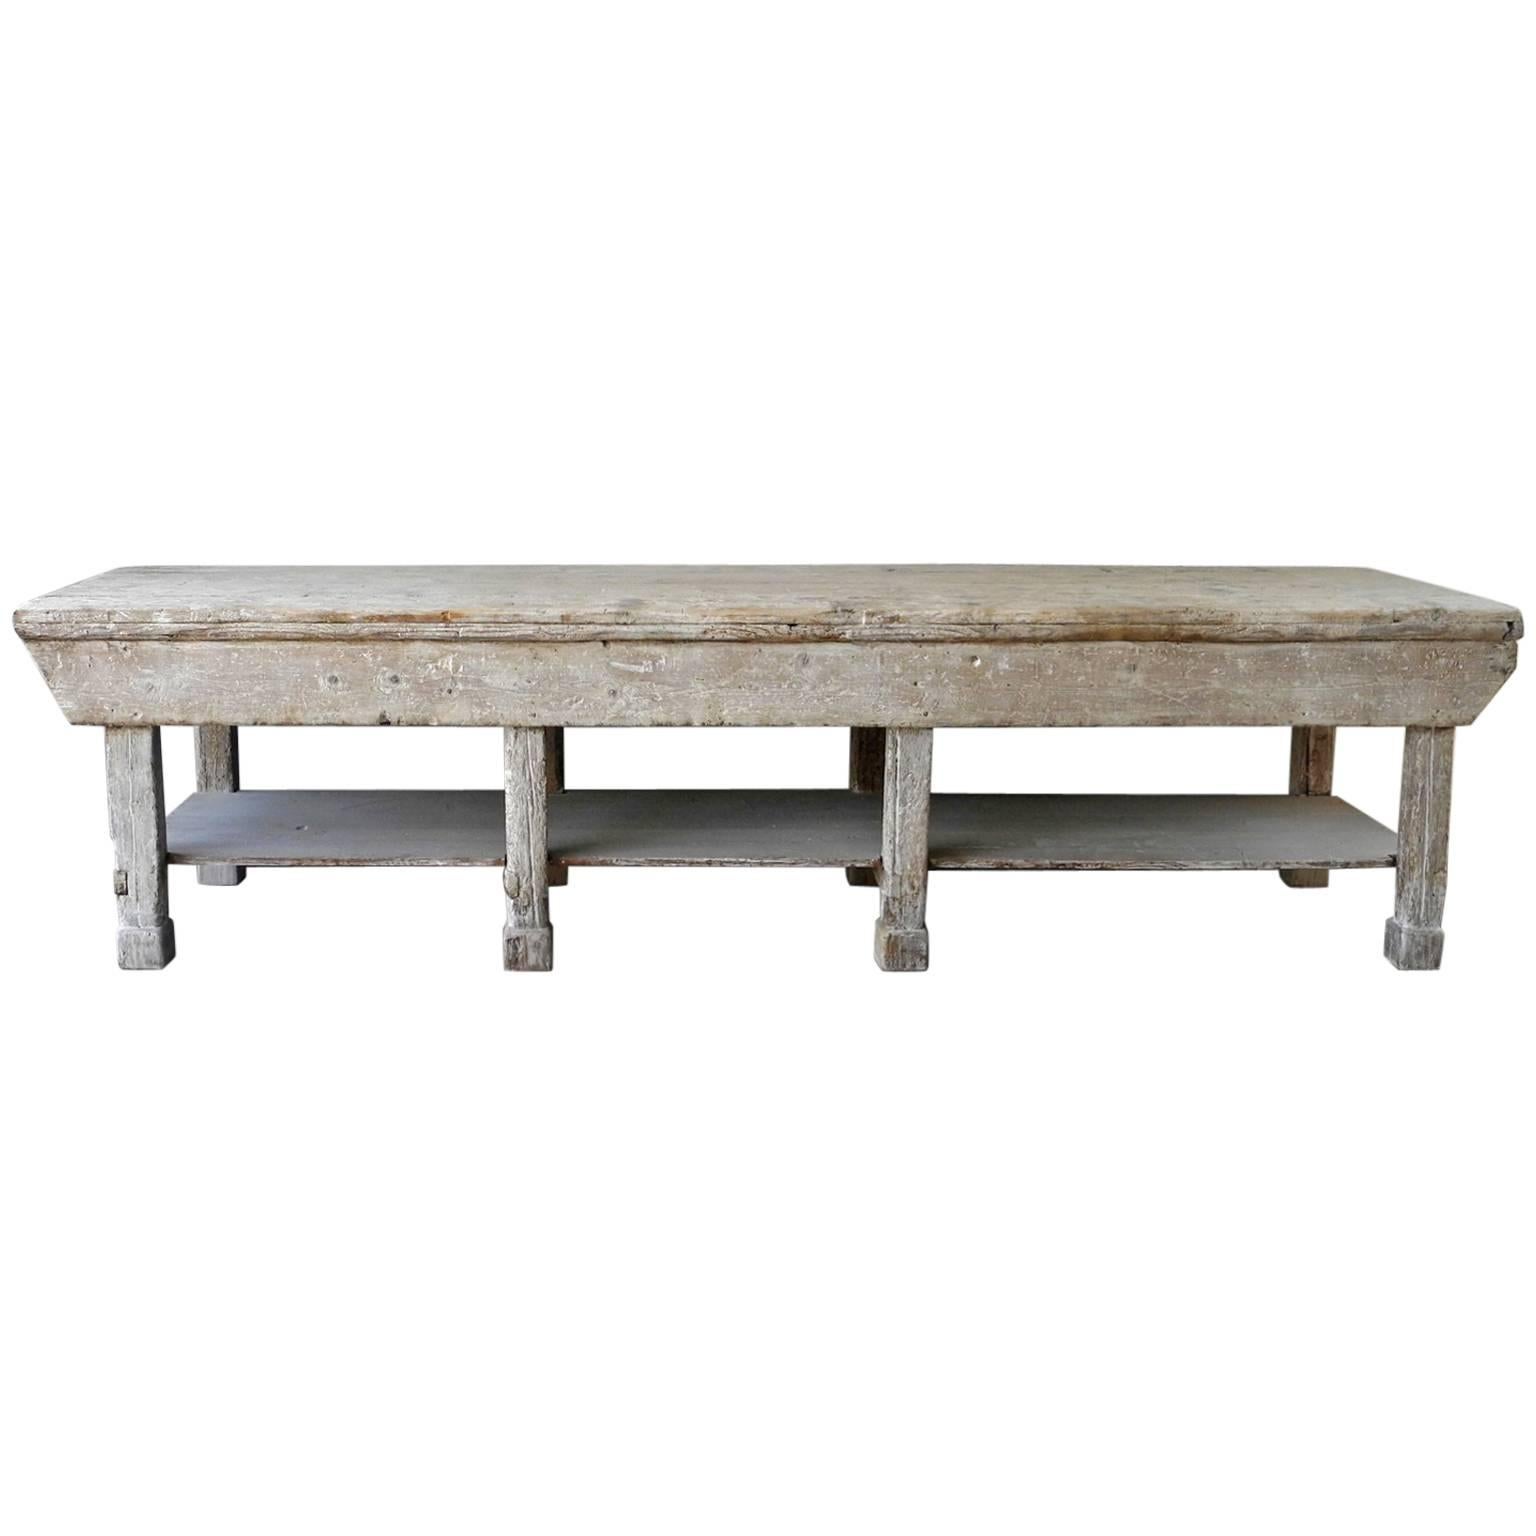 Large Italian Ceramic Sculptor's Table with Bleached Patina and Column Legs